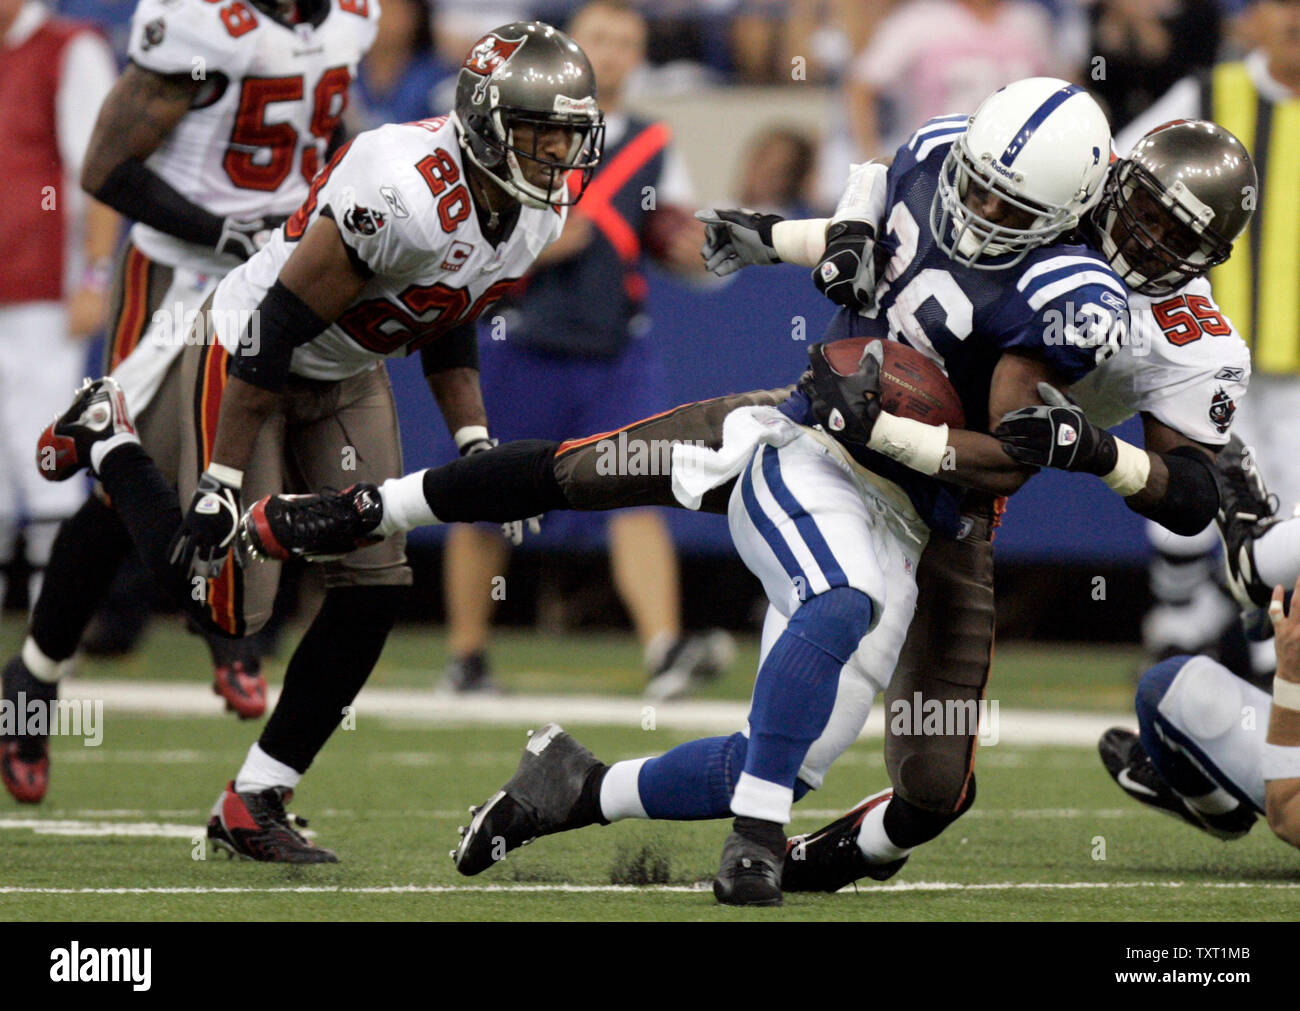 Indianapolis Colts running back Kenton Keith (36) is brought down by Tampa Bay Buccaneers linebacker Derrick Brooks (55) and cornerback Ronde Barber (20) after a 22-yard gain in the fourth quarter at the RCA Dome in Indianapolis on October 7, 2007. The Colts defeated the Buccaneers 33-14 to remain undefeated on the season. (UPI Photo/Mark Cowan) Stock Photo